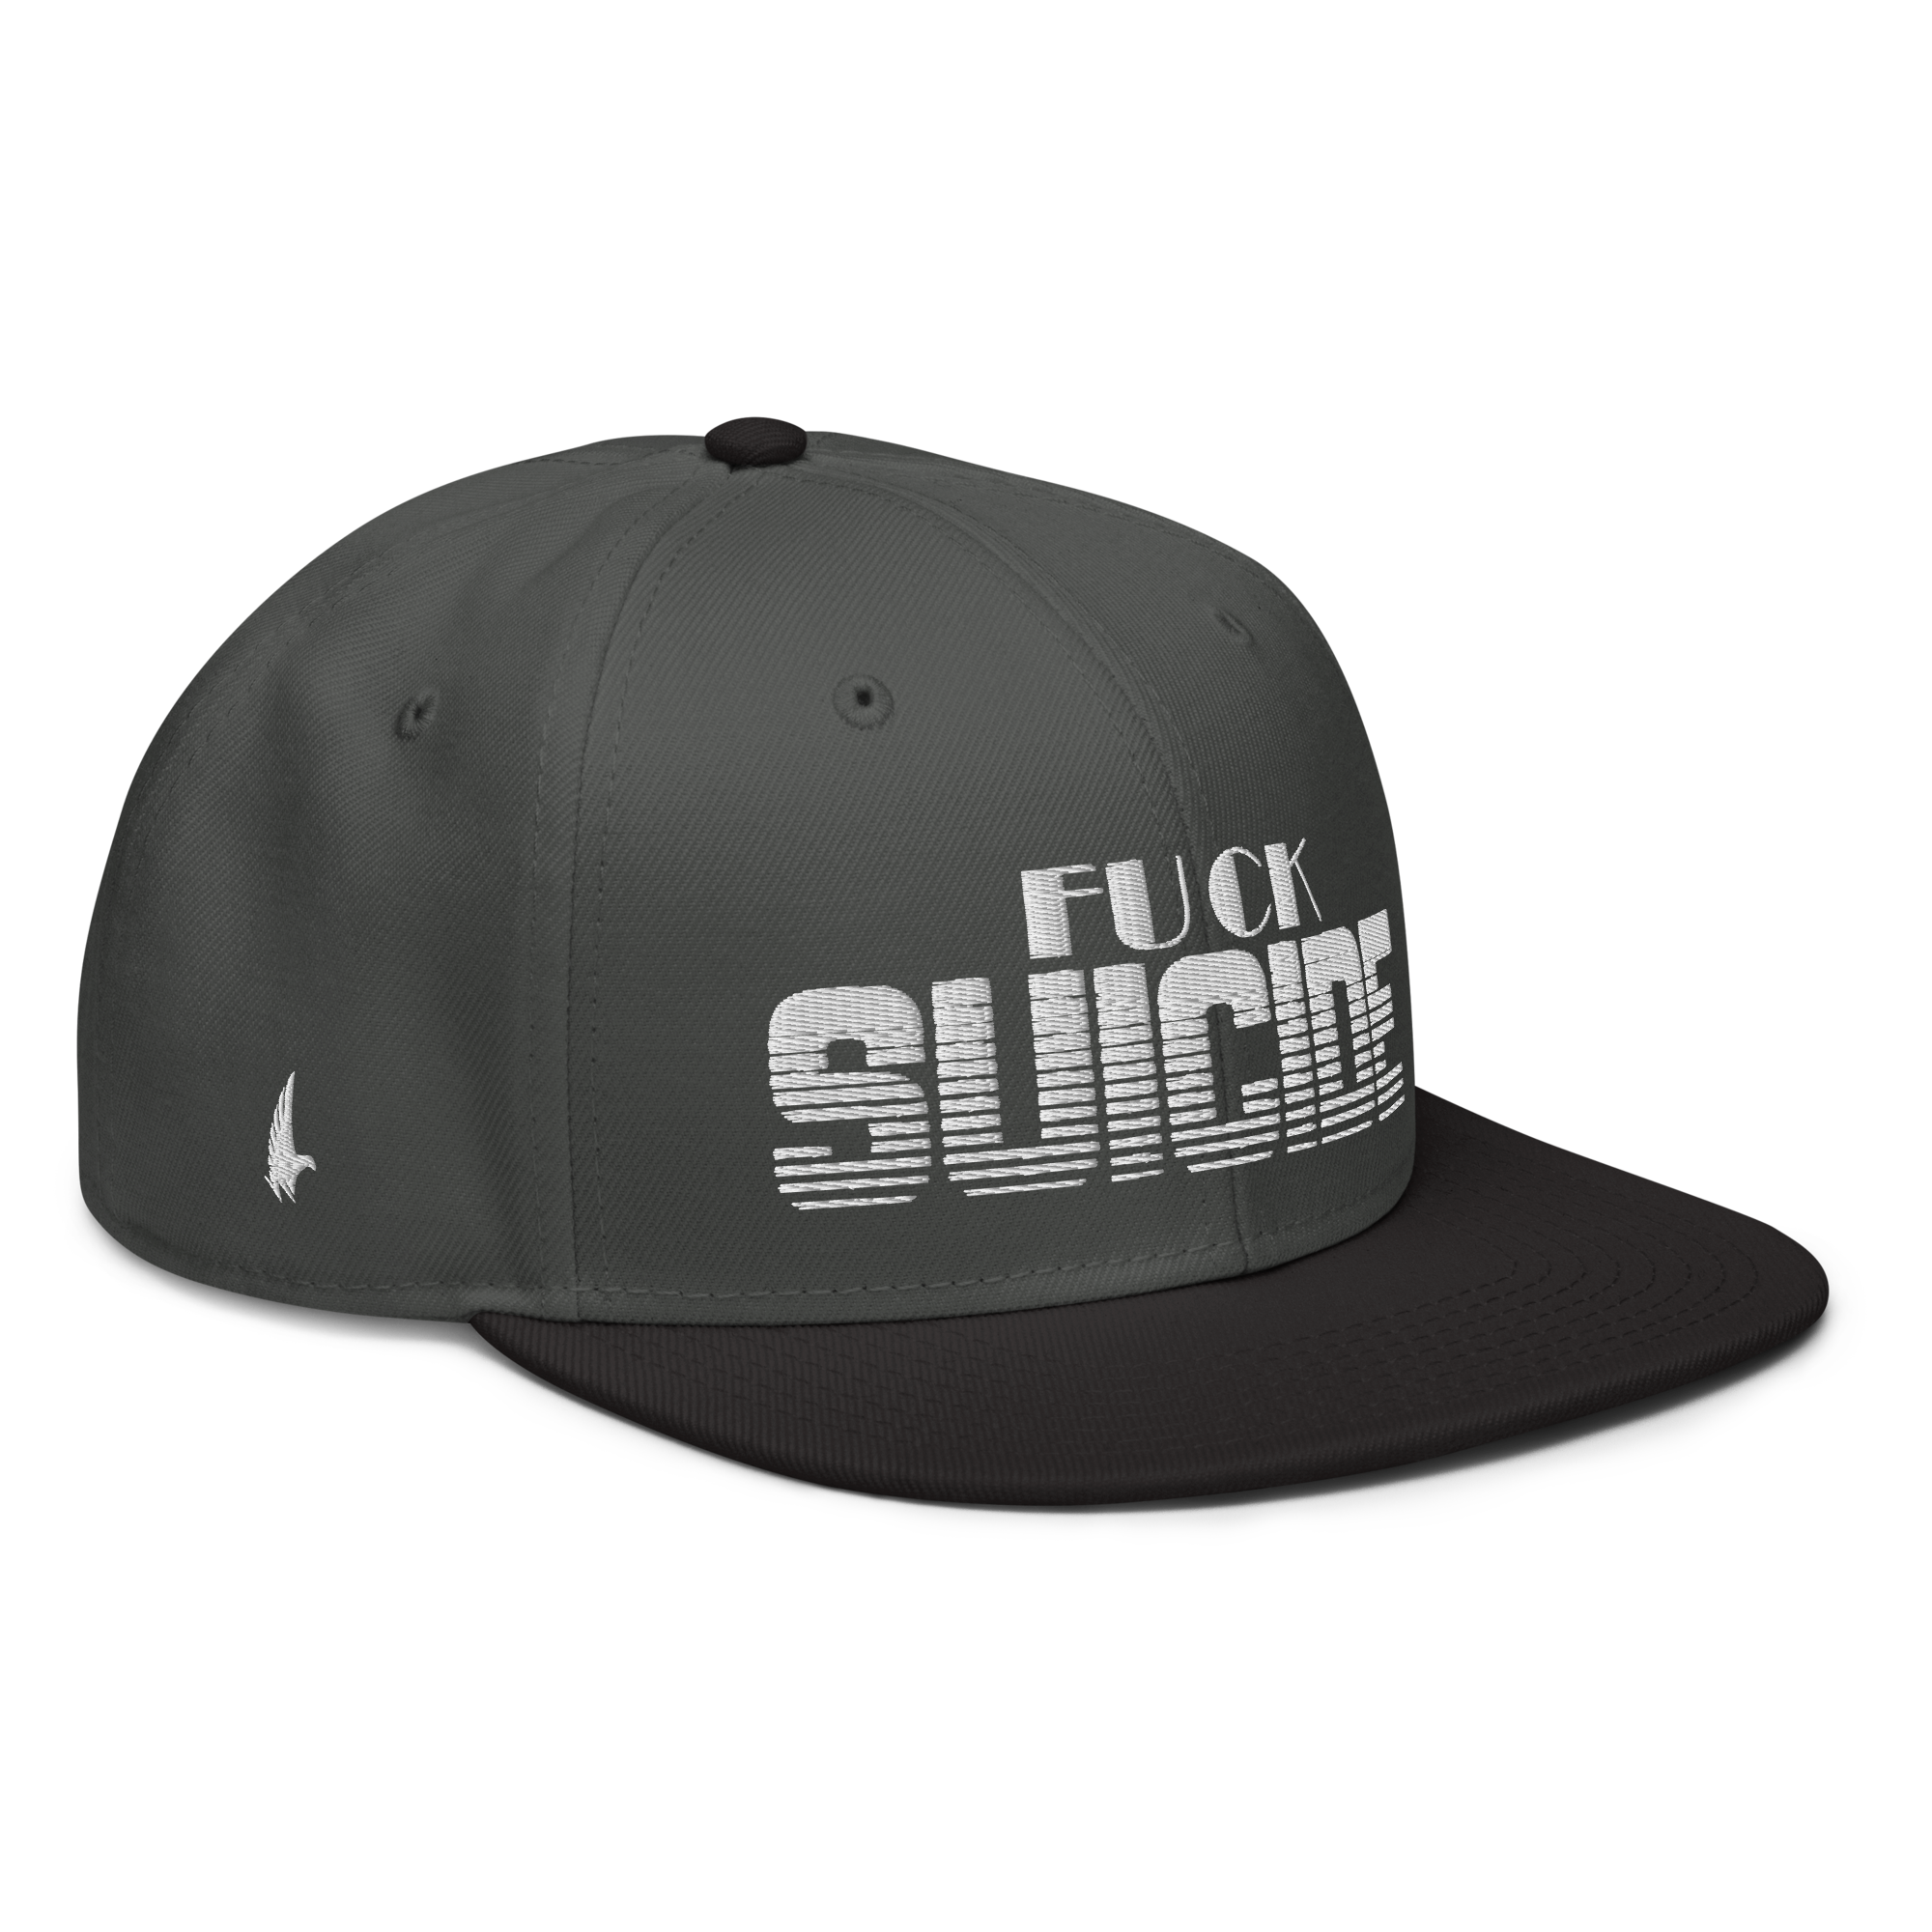 Fk Suicide Snapback Hat - Charcoal Grey / White / Black OS - Loyalty Vibes